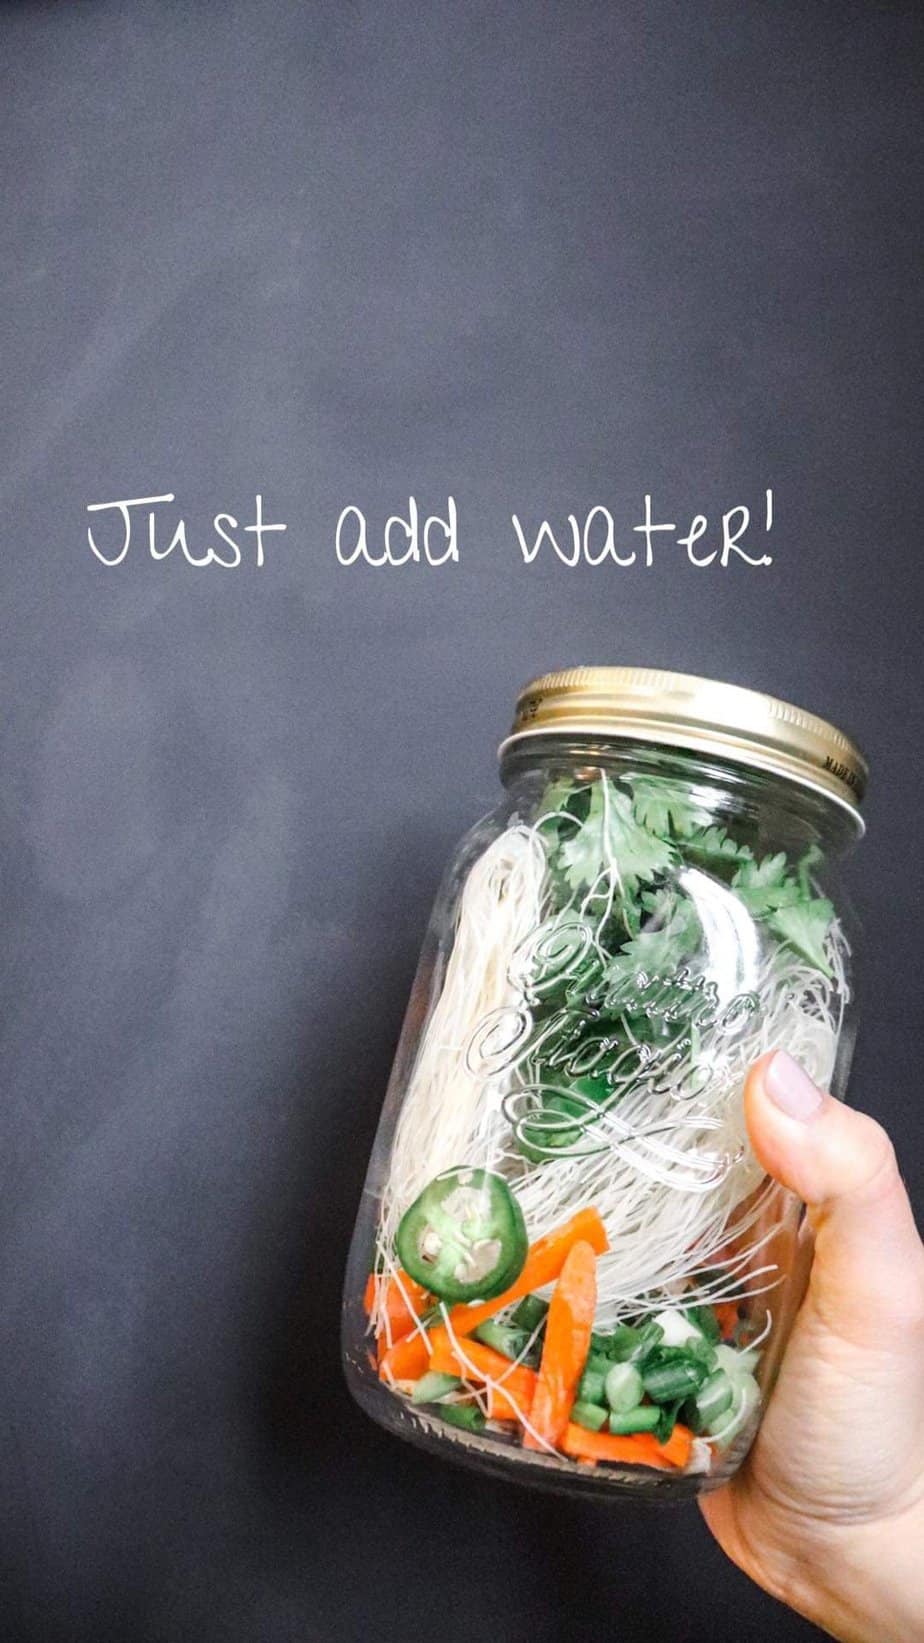 hand holding mason jar noodle cup with words "just add water" written in the background.